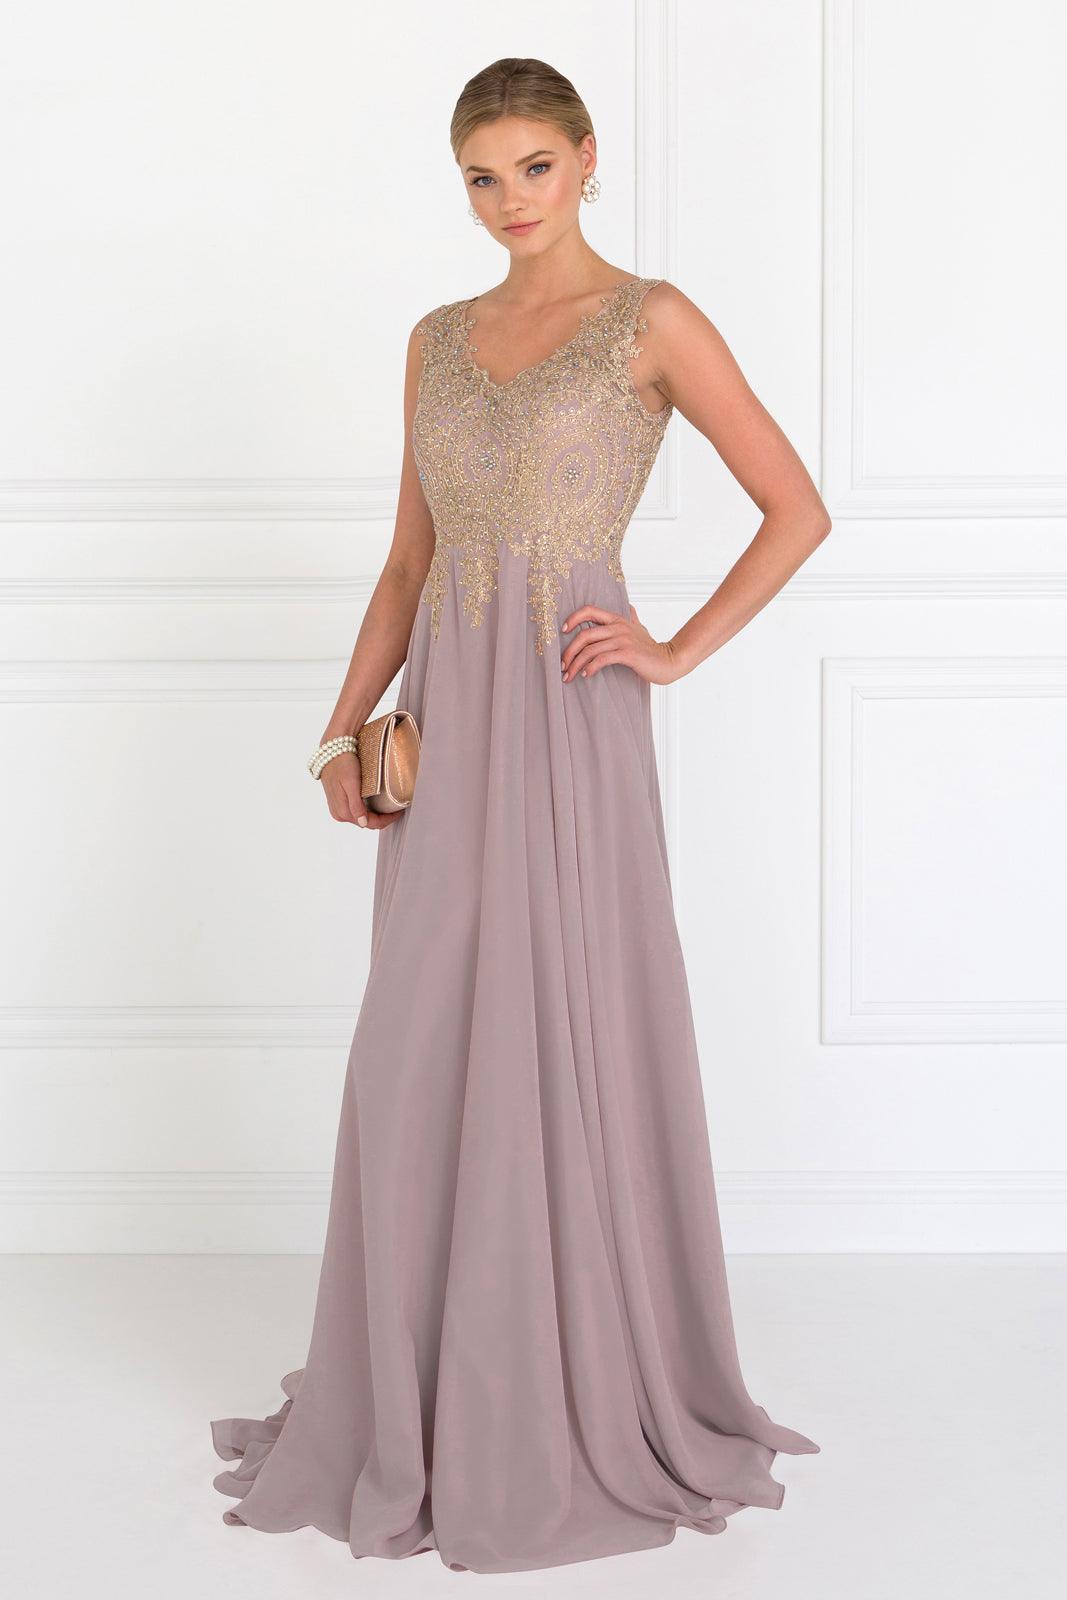 Embroidered Chiffon Long Prom Dress Formal - The Dress Outlet